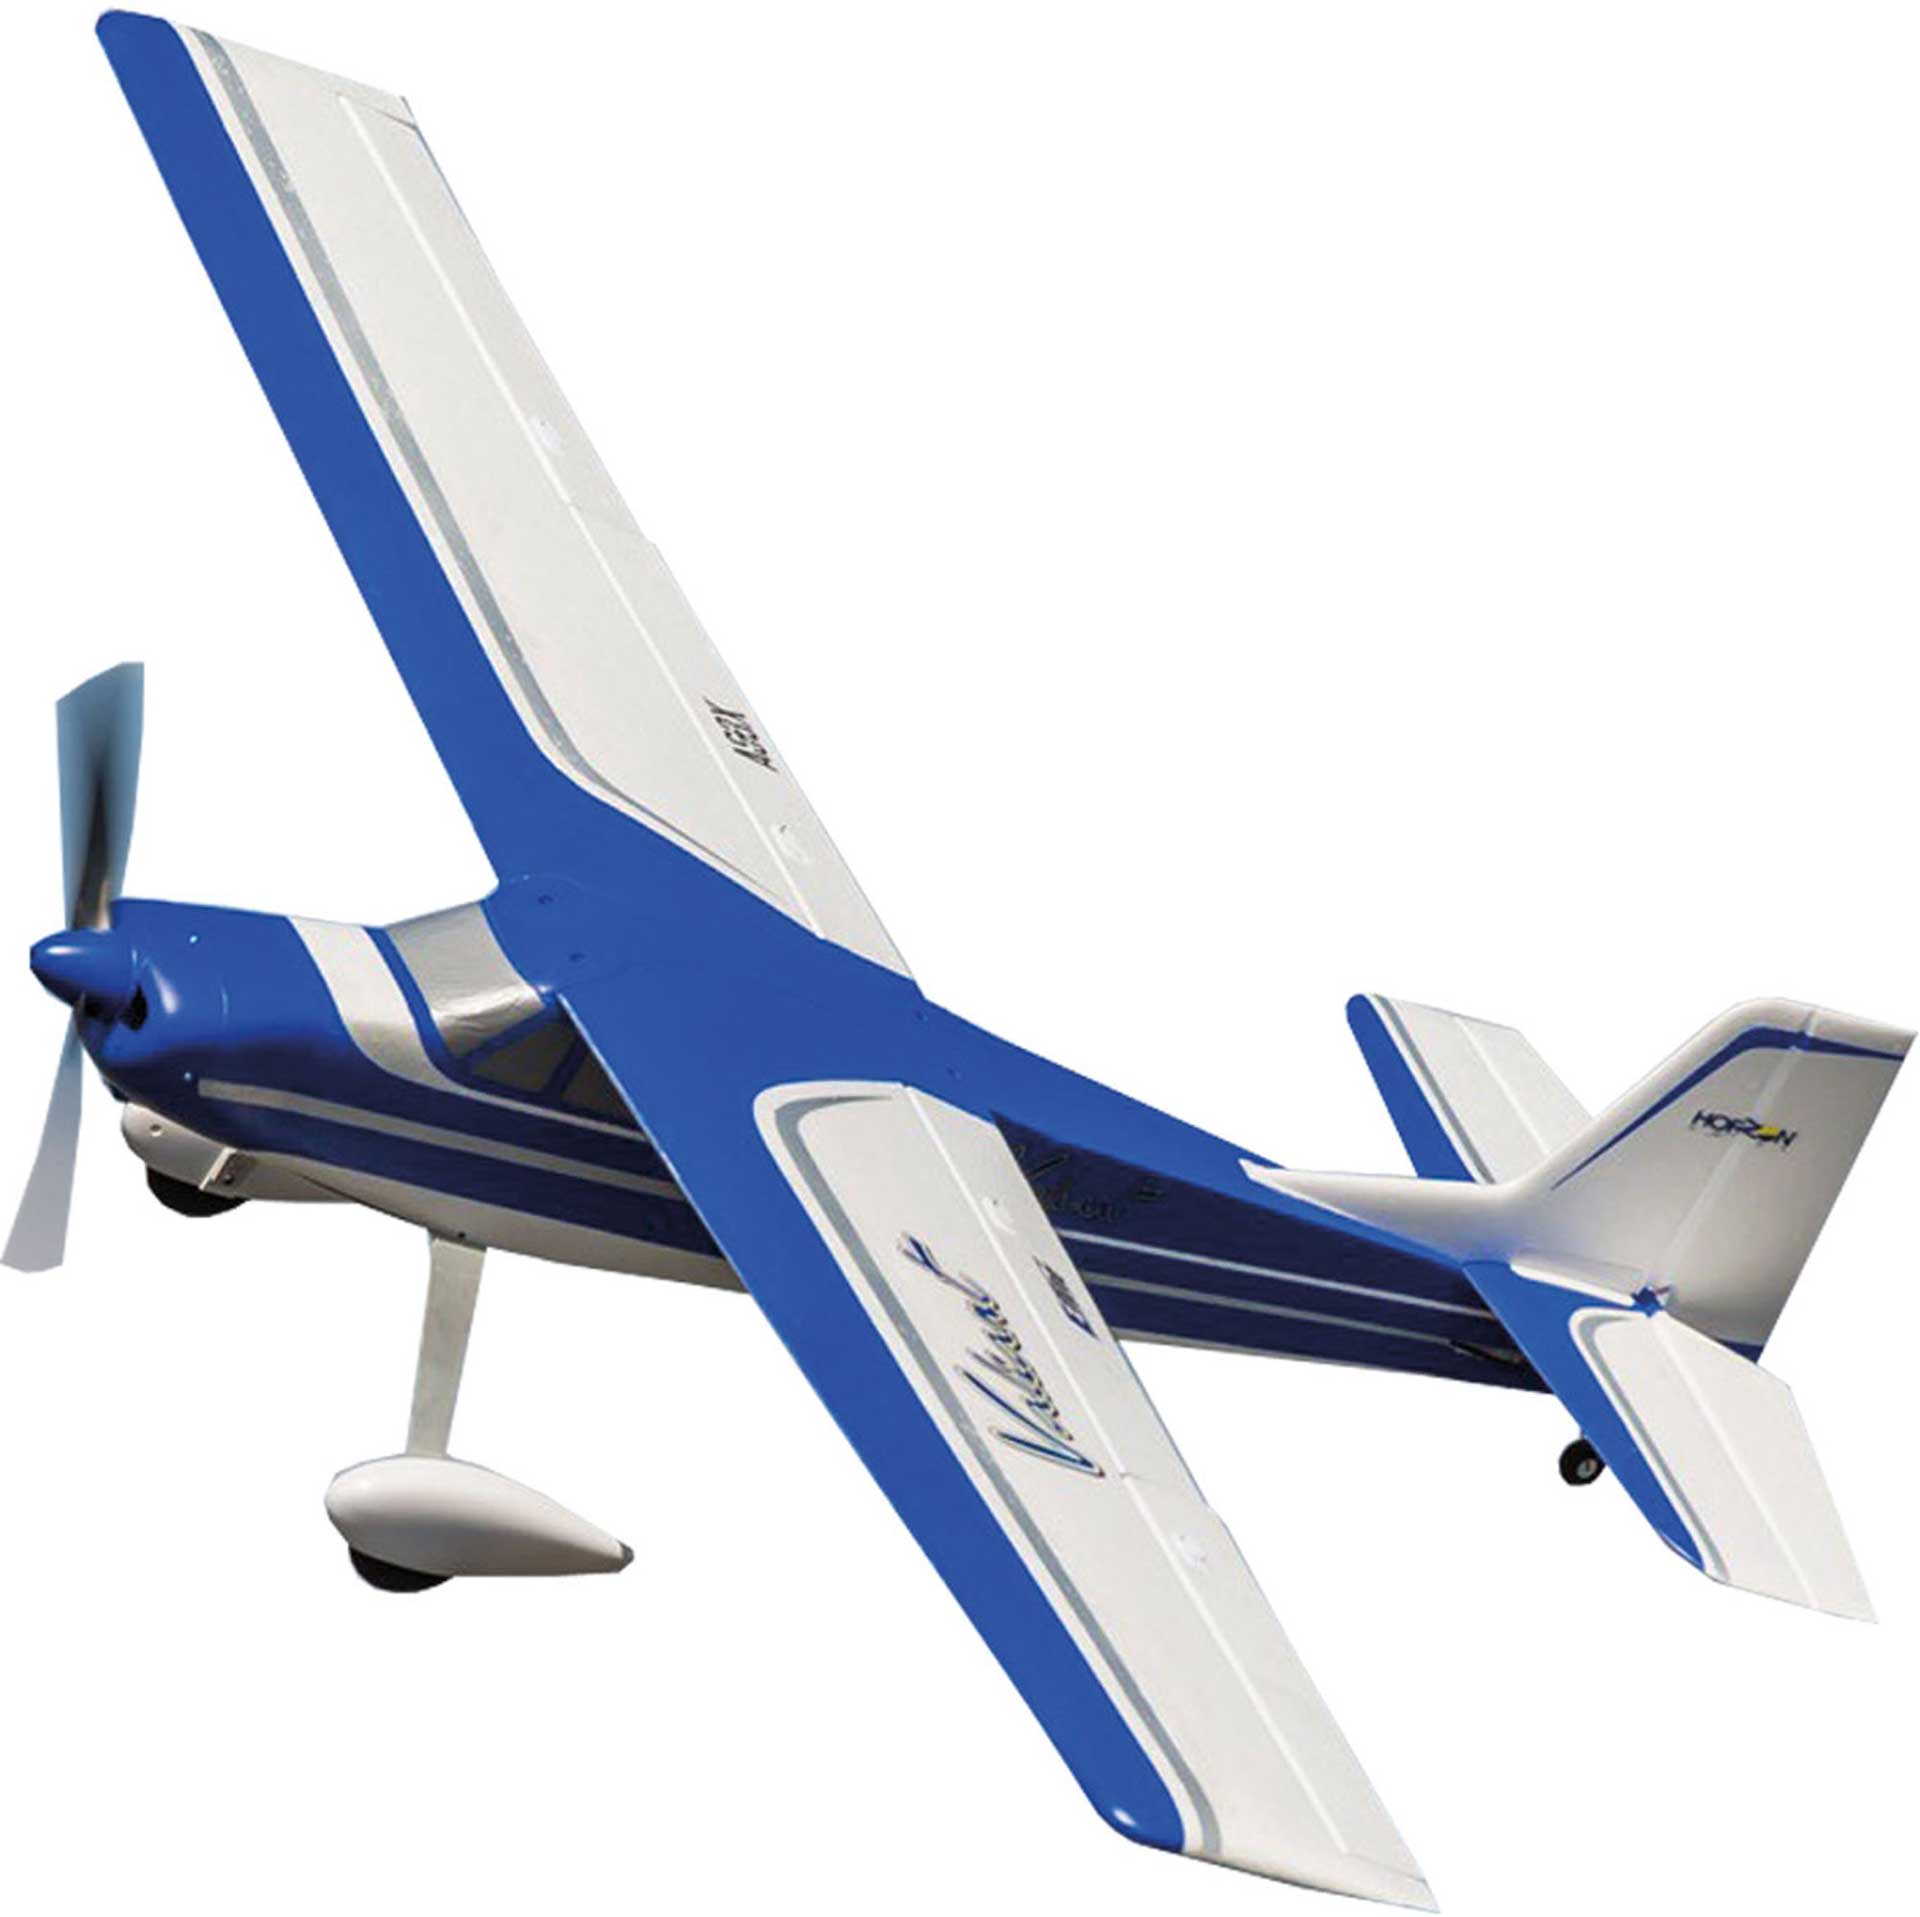 E-FLITE VALIANT™ 1.3 BNF BASIC WITH AS3X SAFE TECHNOLOGY